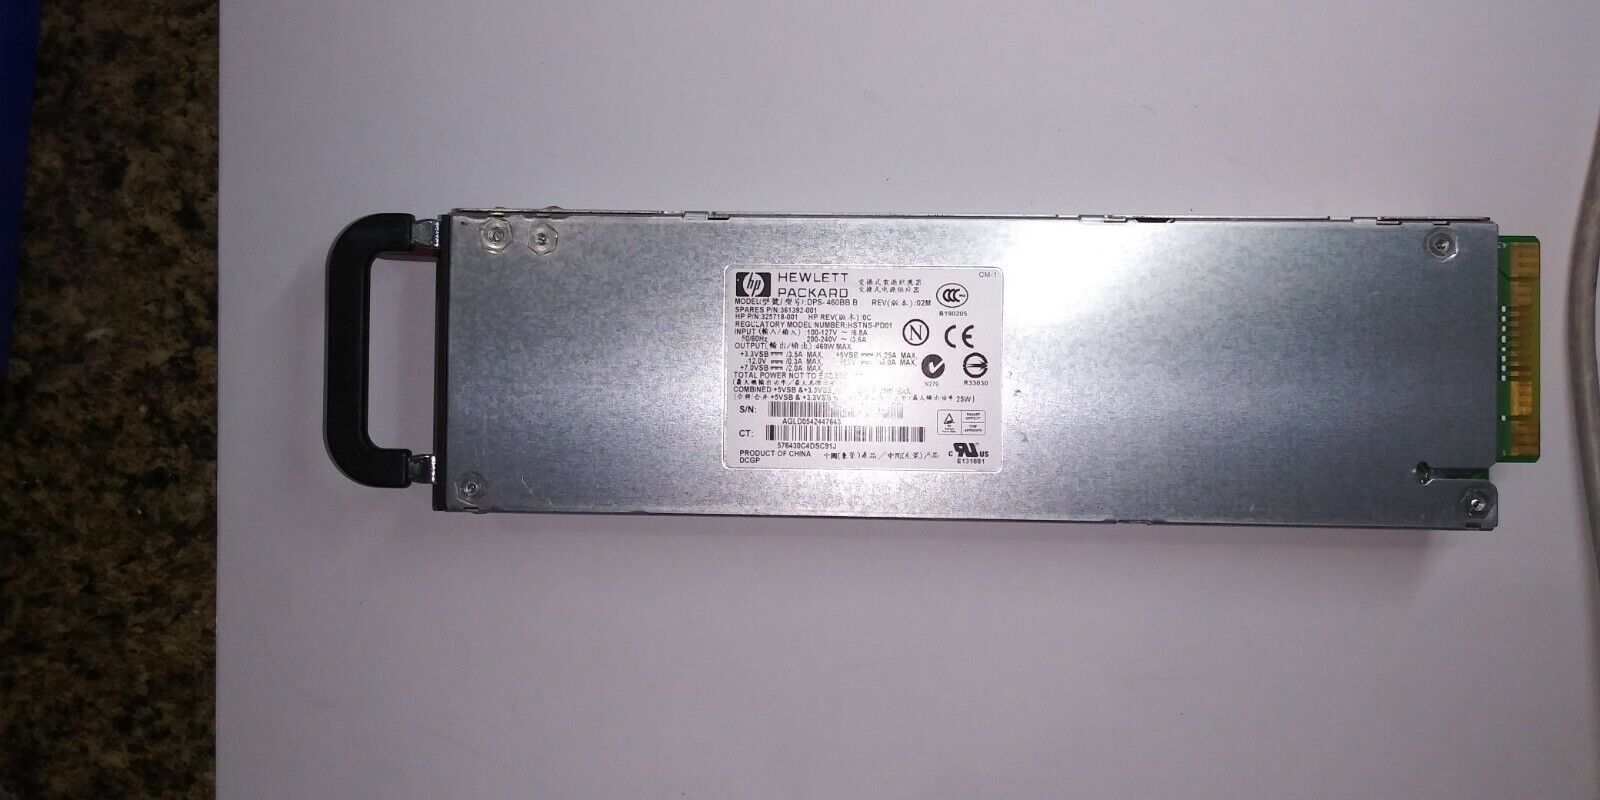 HP DPS-460BB B Server 460W PSU 361392-001 325718-001 HSTNS-PD01 TESTED |